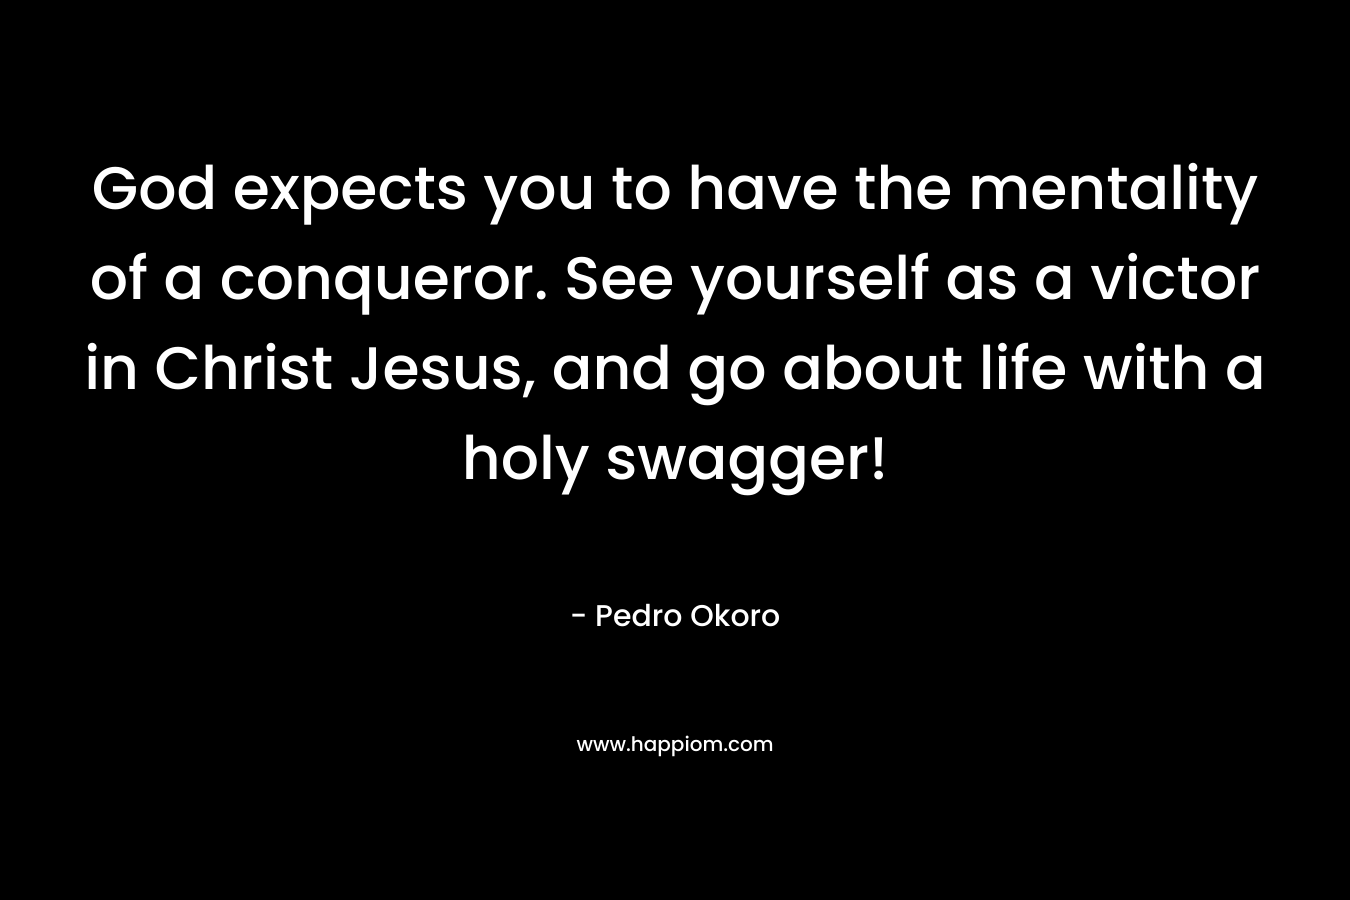 God expects you to have the mentality of a conqueror. See yourself as a victor in Christ Jesus, and go about life with a holy swagger! – Pedro Okoro